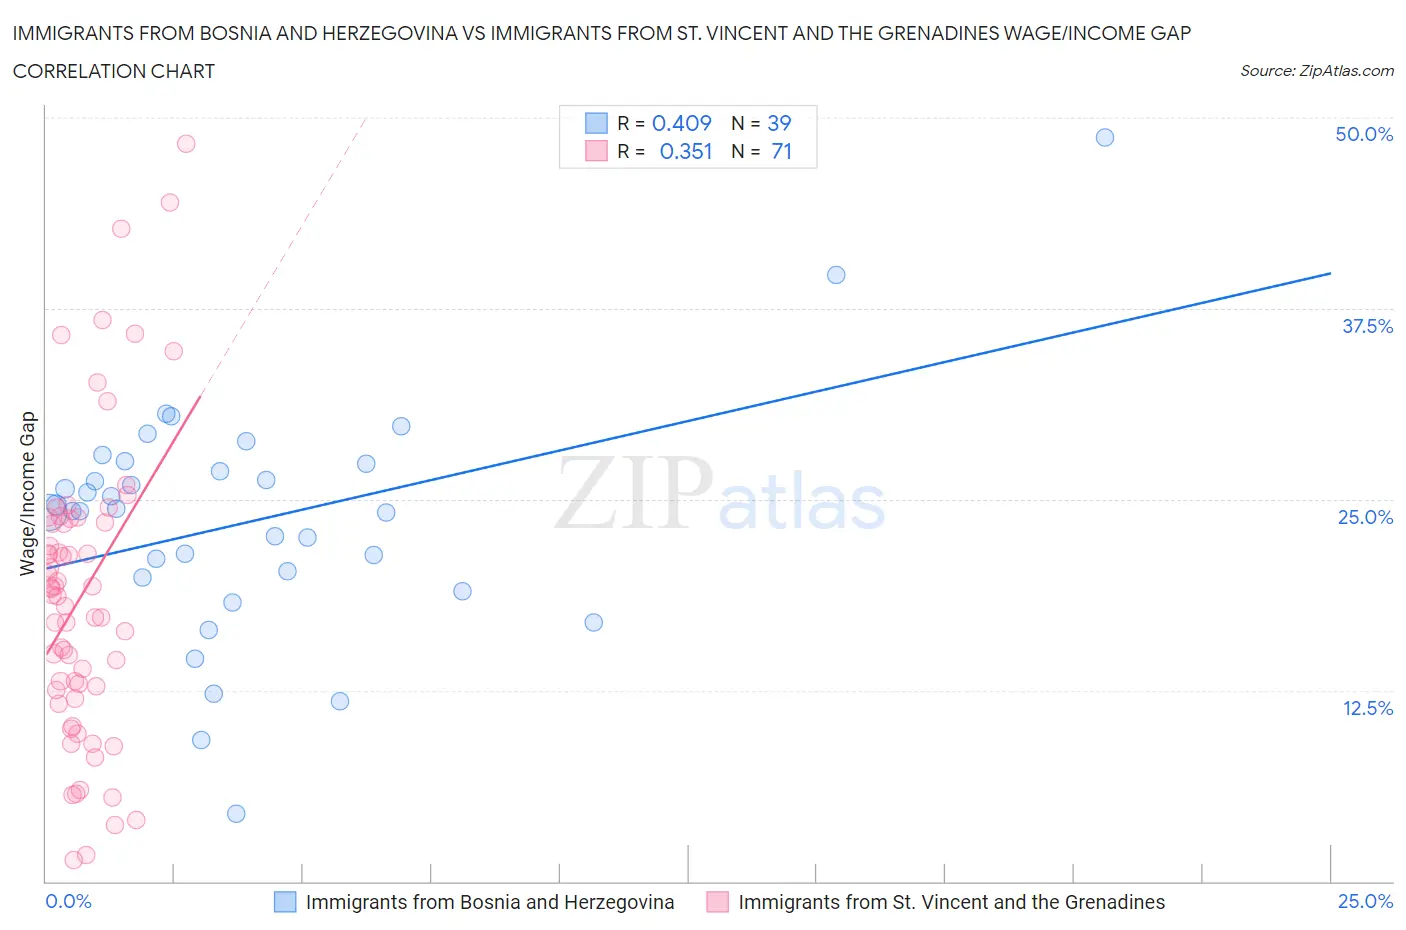 Immigrants from Bosnia and Herzegovina vs Immigrants from St. Vincent and the Grenadines Wage/Income Gap